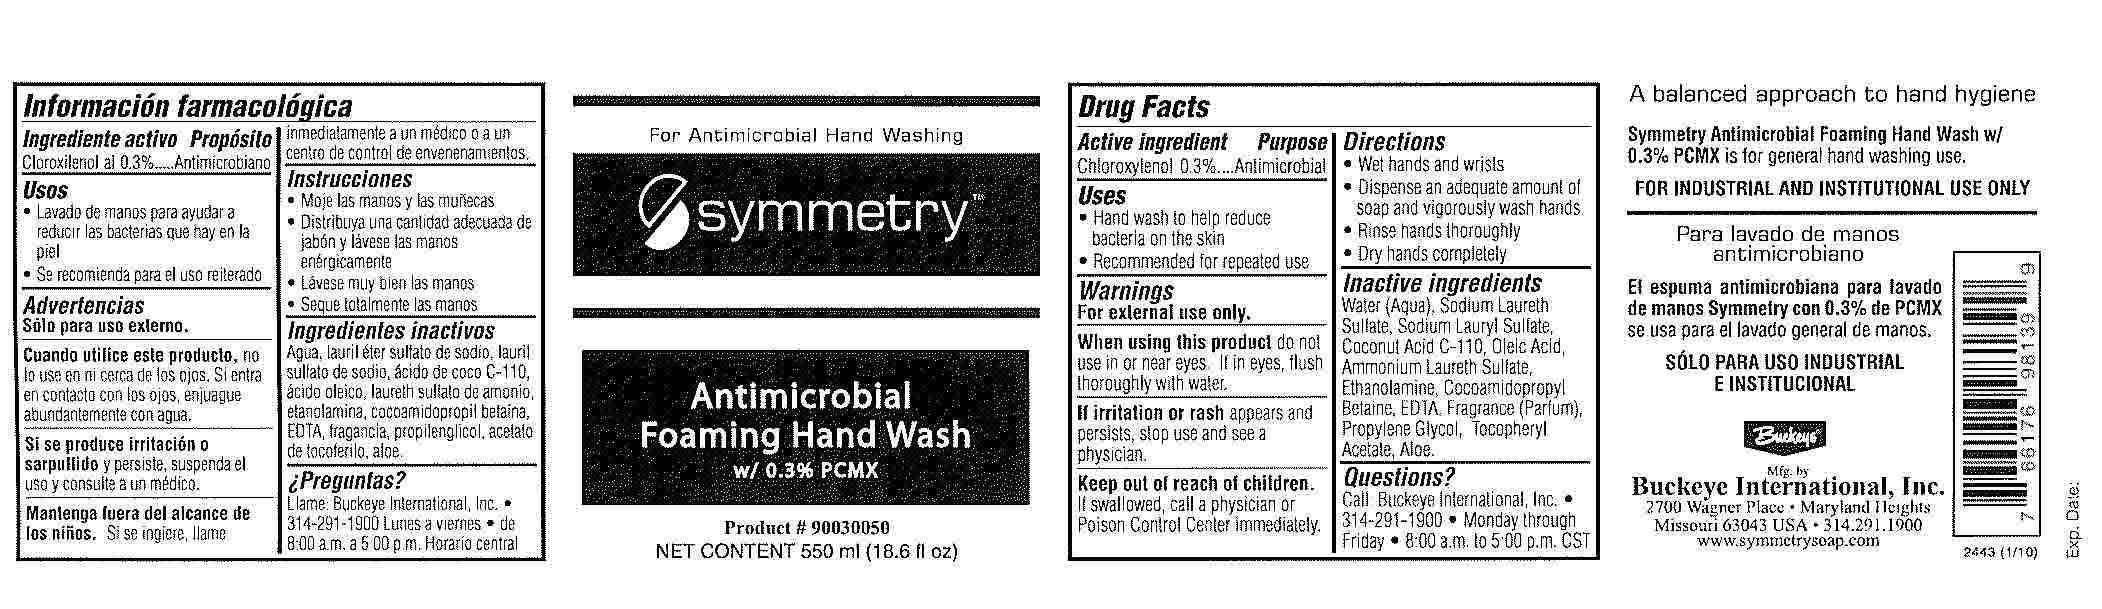 symmetry Antimicrobial Foaming Hand Wash